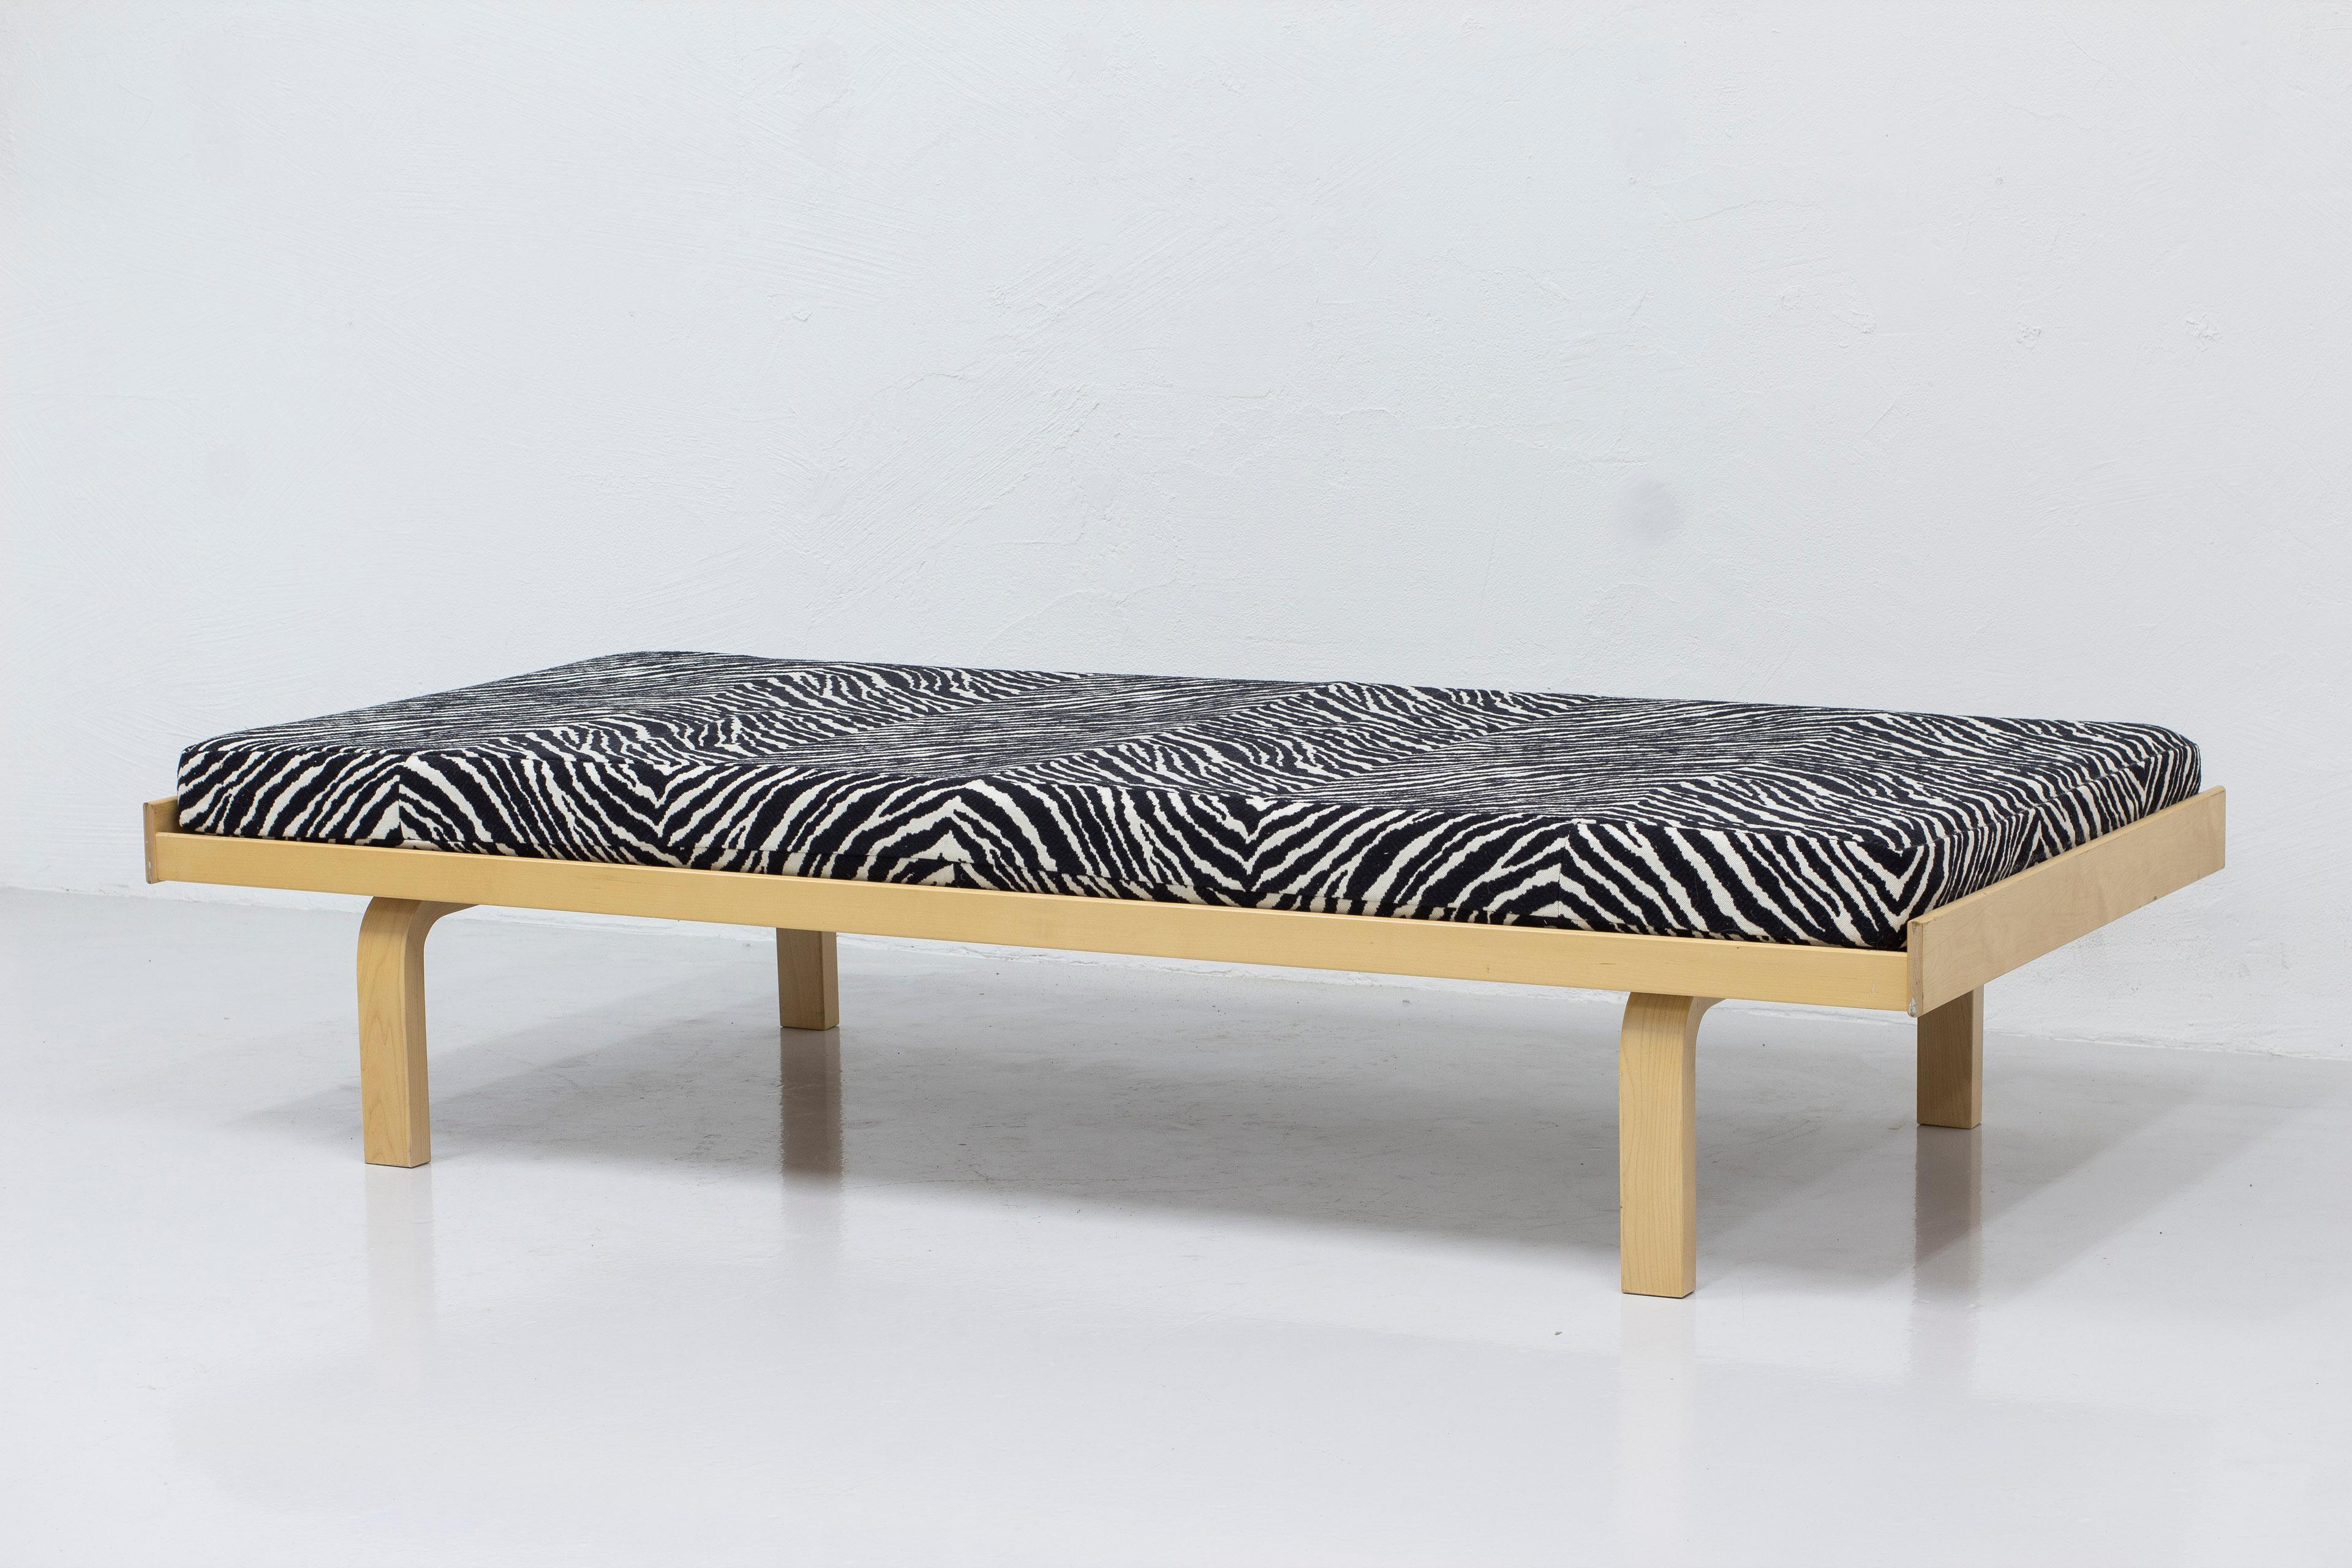 Iconic daybed model 710 designed by Alvar Aalto. Made completely from solid birch with lacquer finish. The mattress is upholstered in the iconic zebra fabric designed by Bauhaus designer Otti Berger. The fabric was hand picked by Aino Aalto in 1935